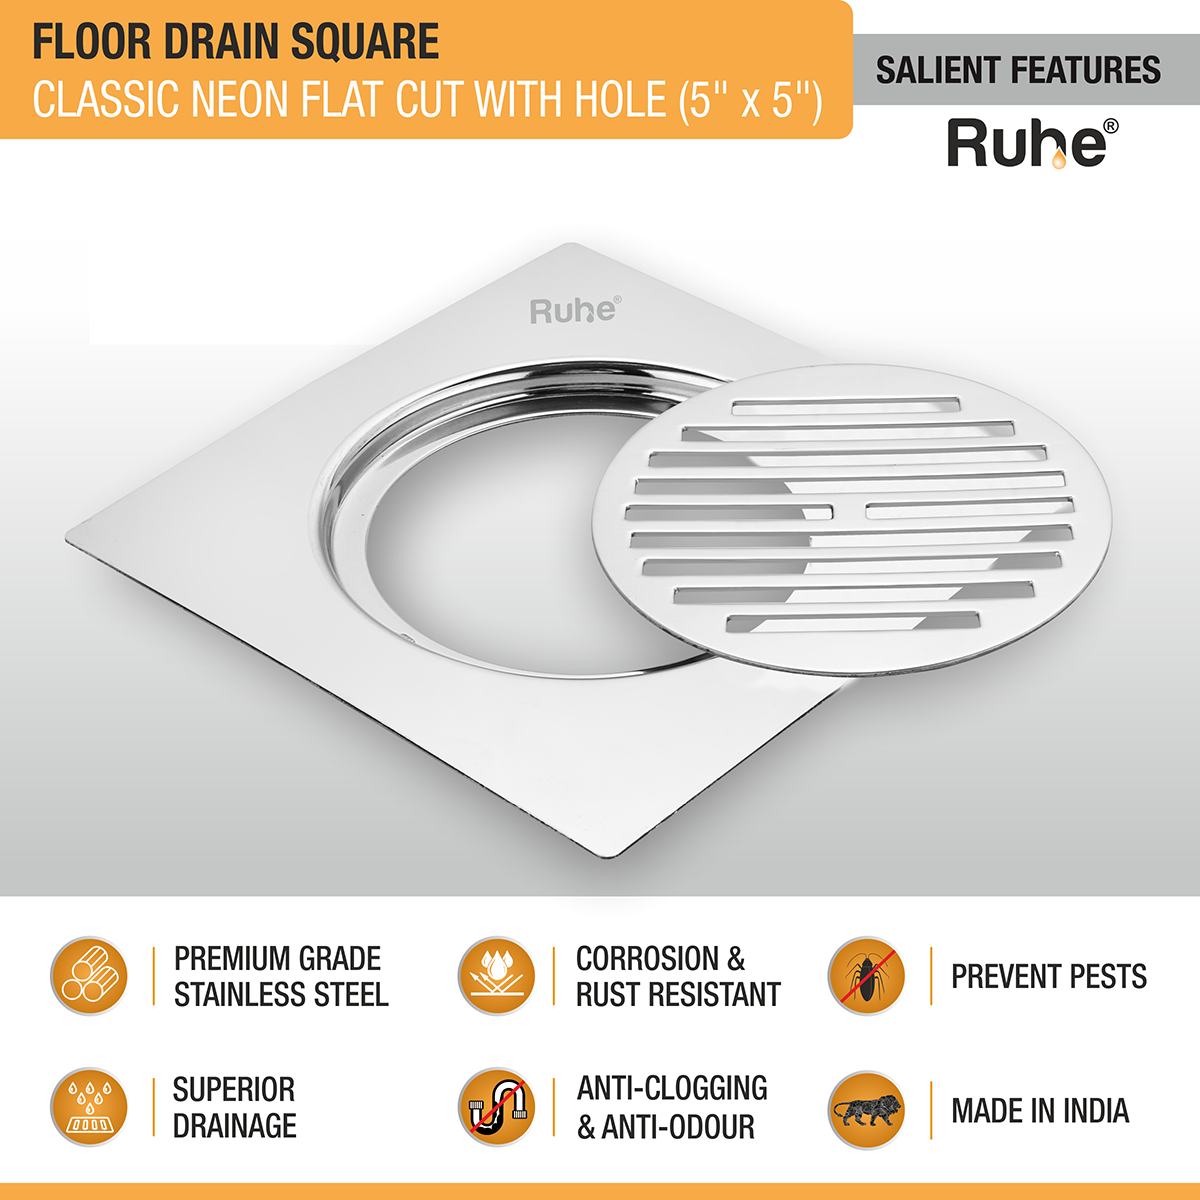 Classic Neon Square Flat Cut Floor Drain (5 x 5 inches) with Hole features